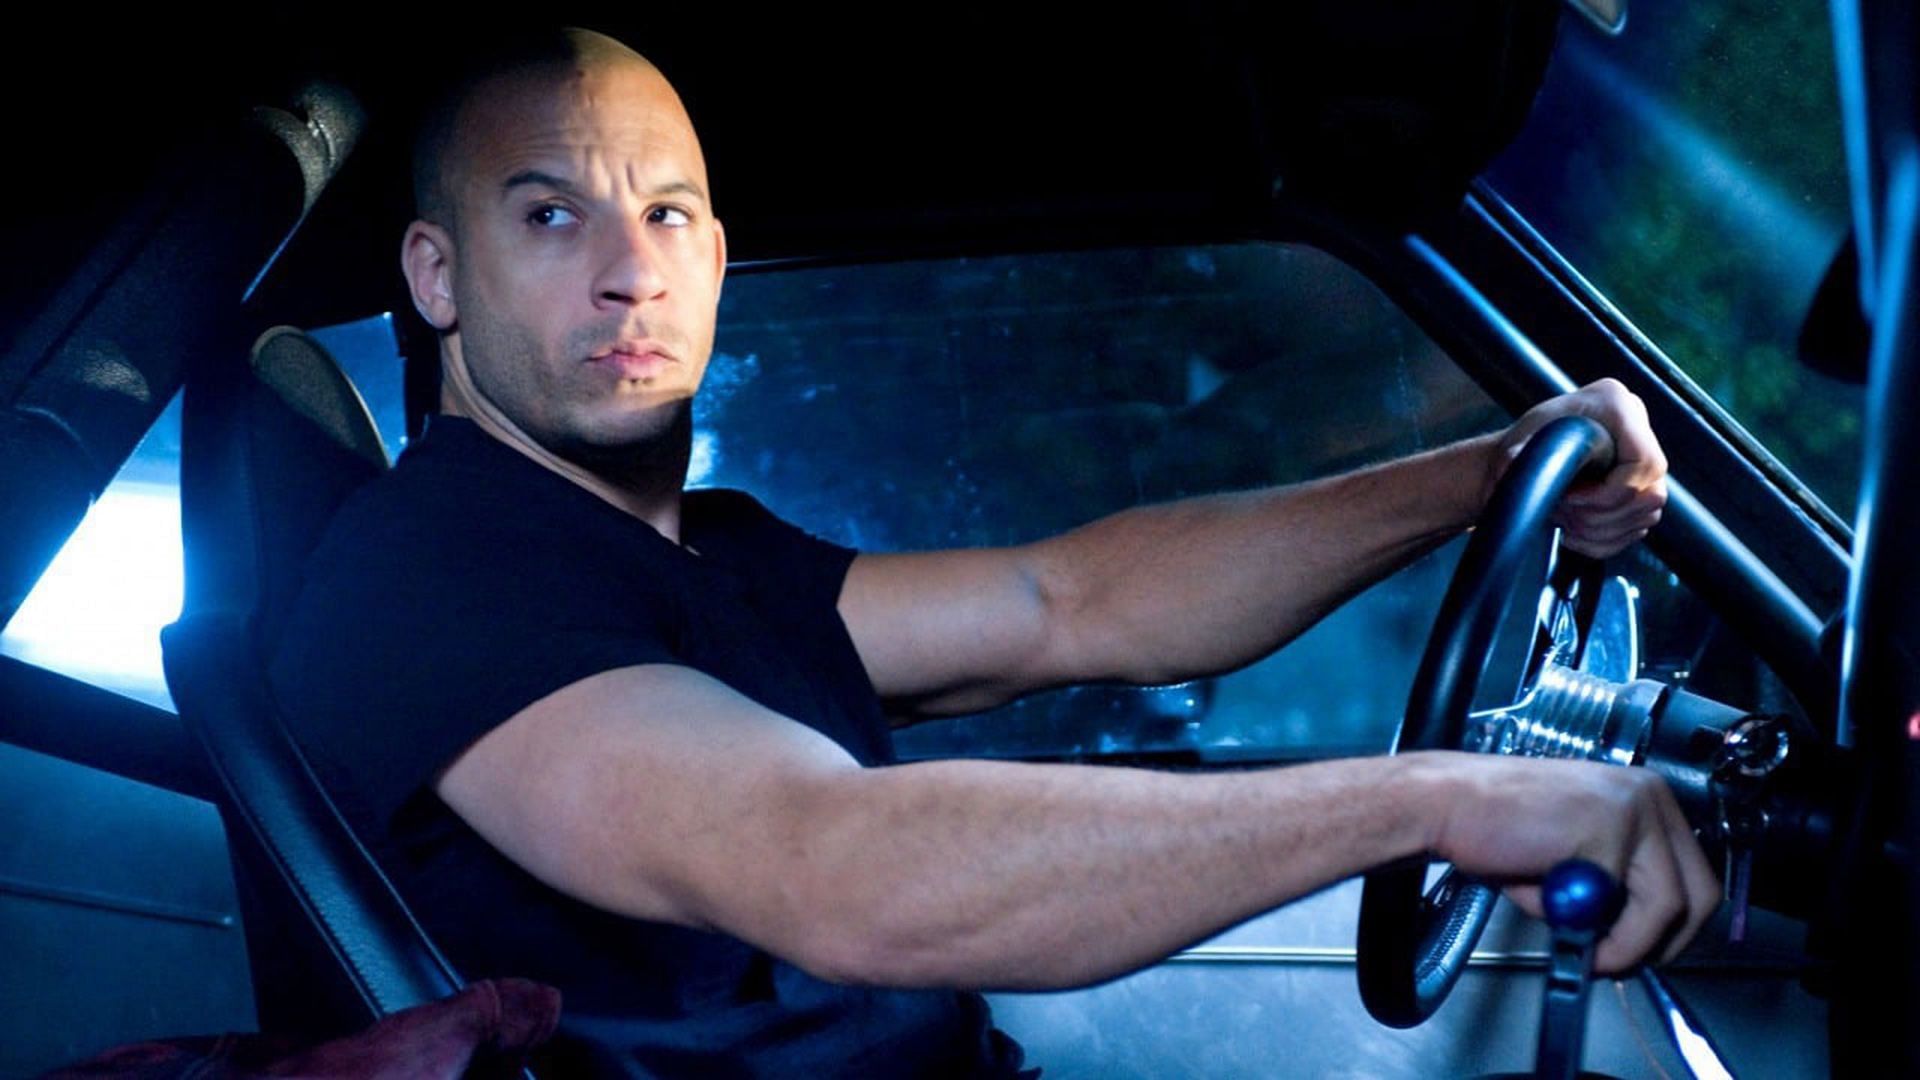 Vin Diesel stars as Dominic Toretto in the Fast &amp; Furious franchise (Image via Universal)